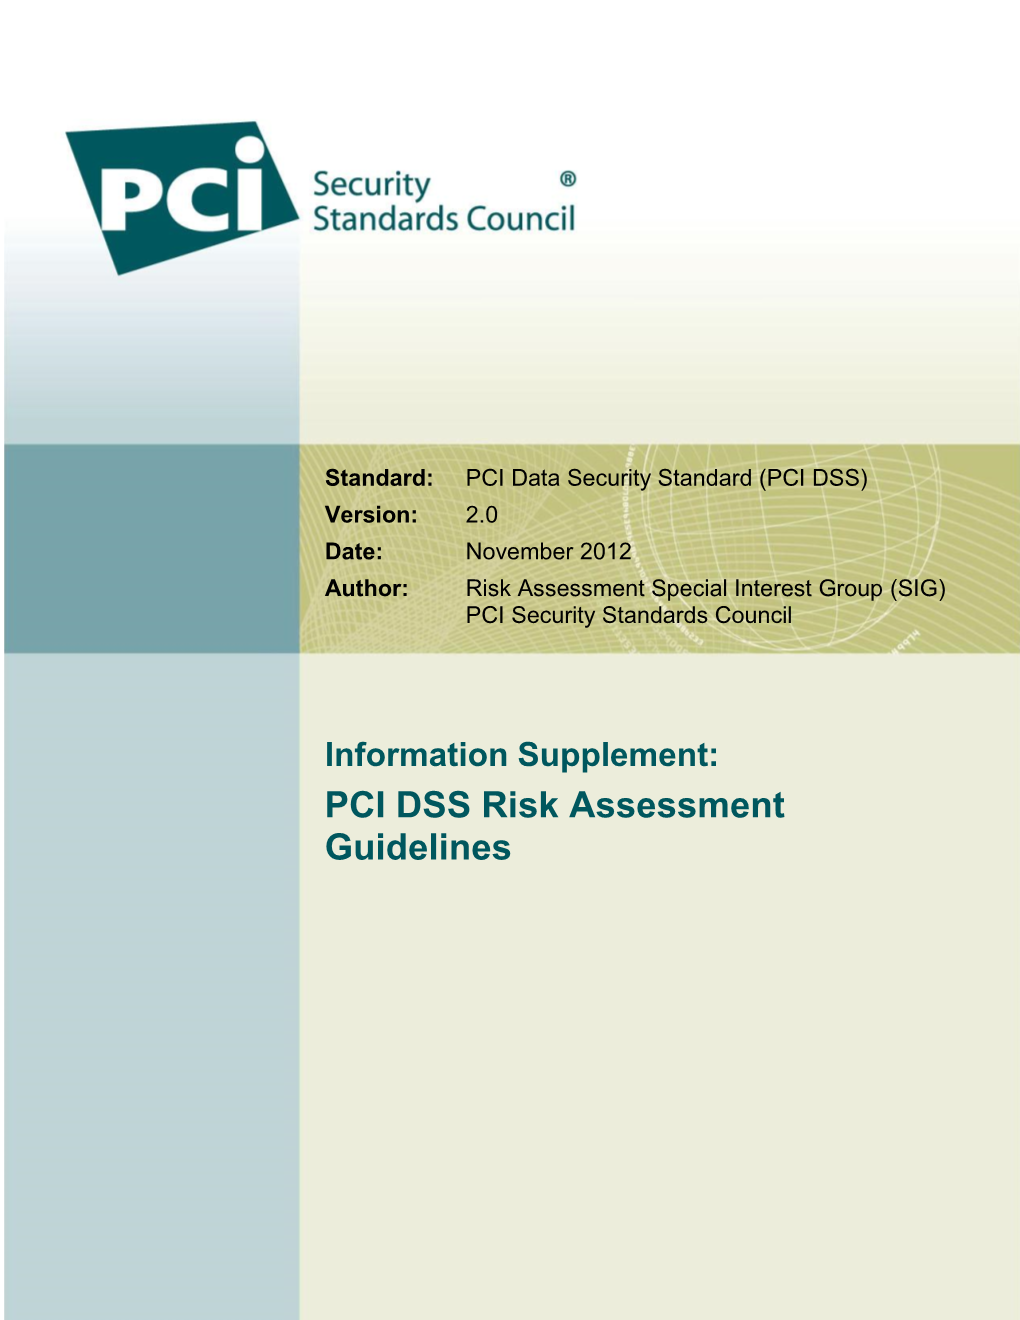 Risk Assessment Special Interest Group (SIG) PCI Security Standards Council